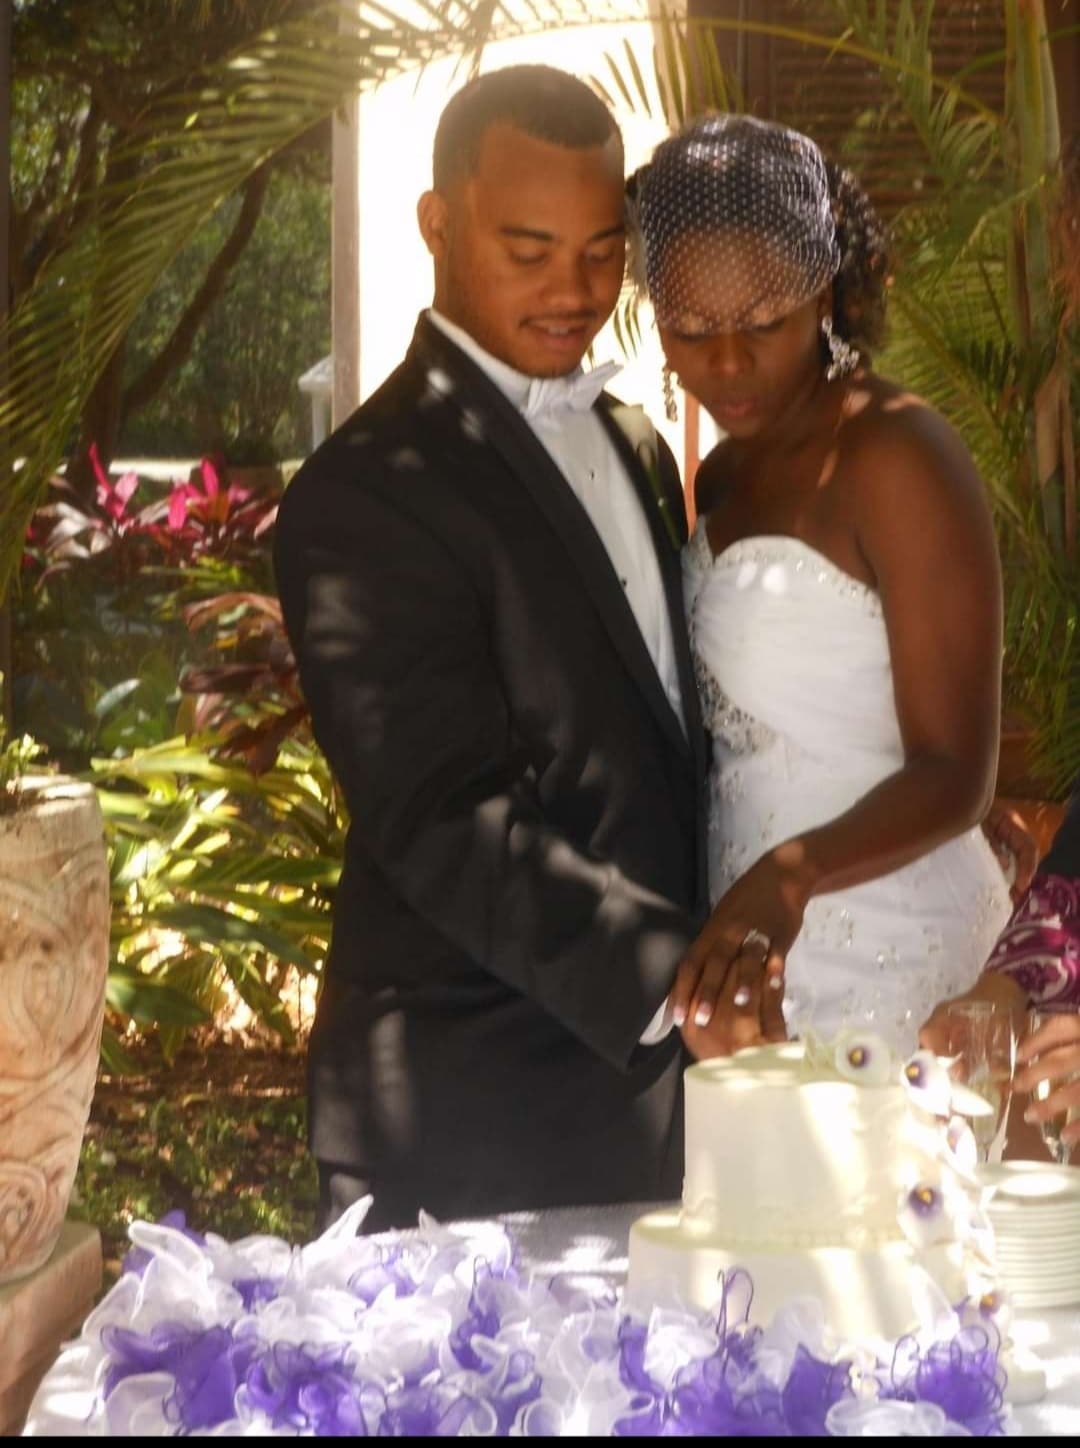 insider tips from married wedding vendors, small or large, make it personal, Bride and Groom cutting cake